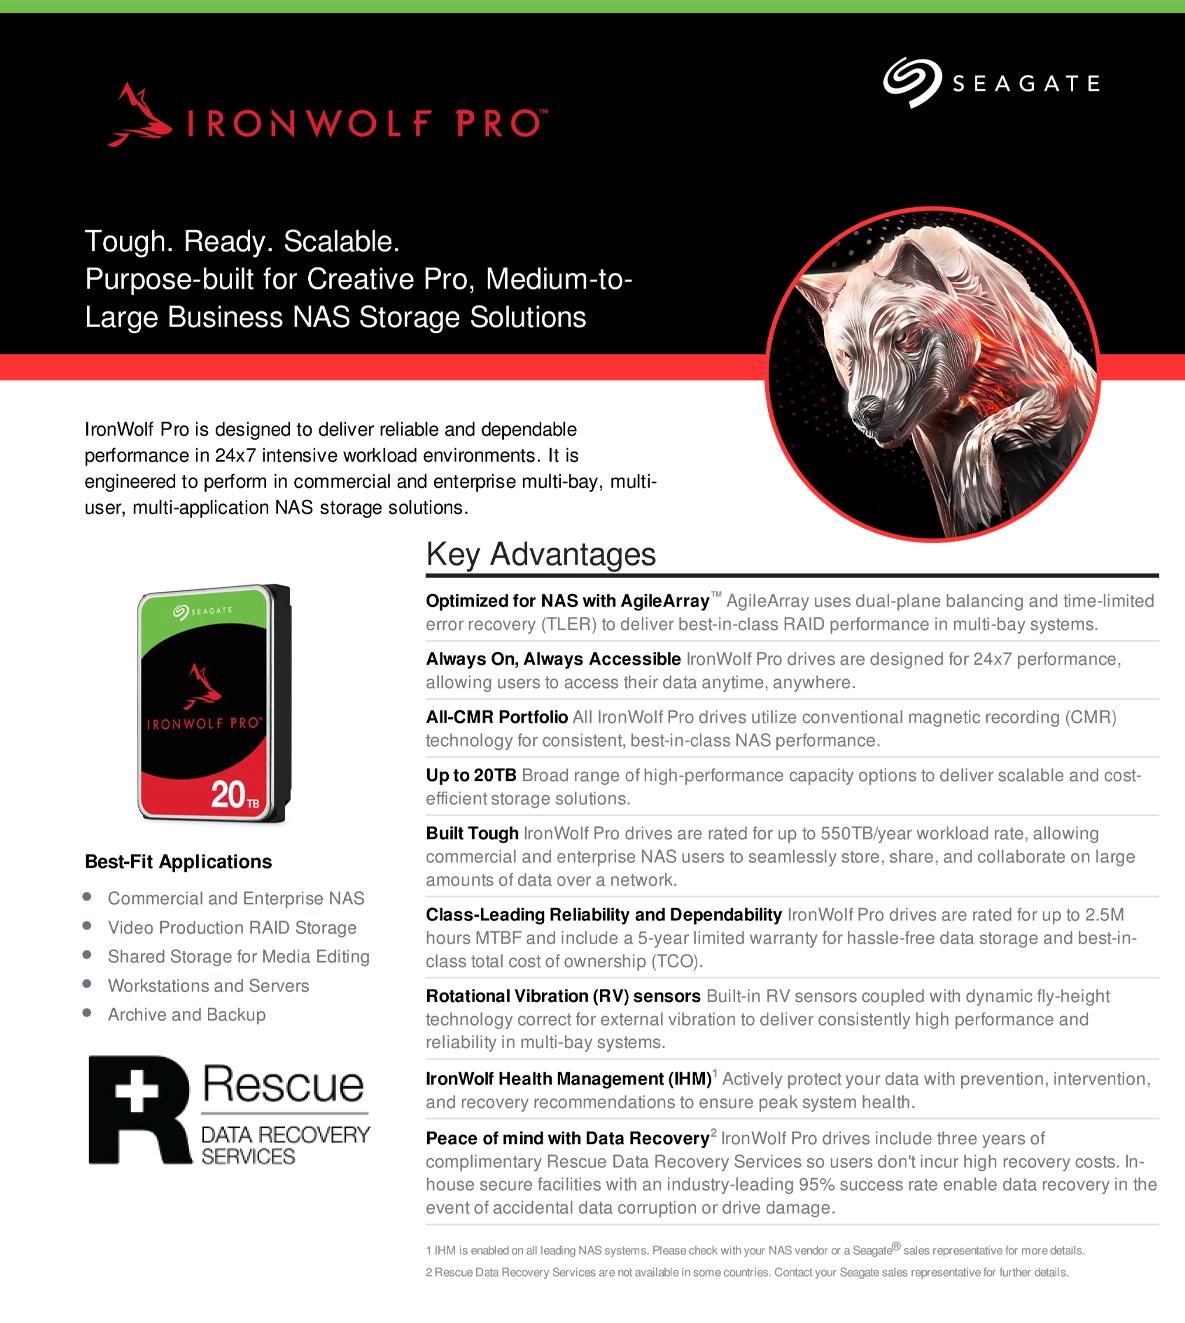 A large marketing image providing additional information about the product Seagate IronWolf Pro 3.5" NAS HDD - 4TB 256MB - Additional alt info not provided